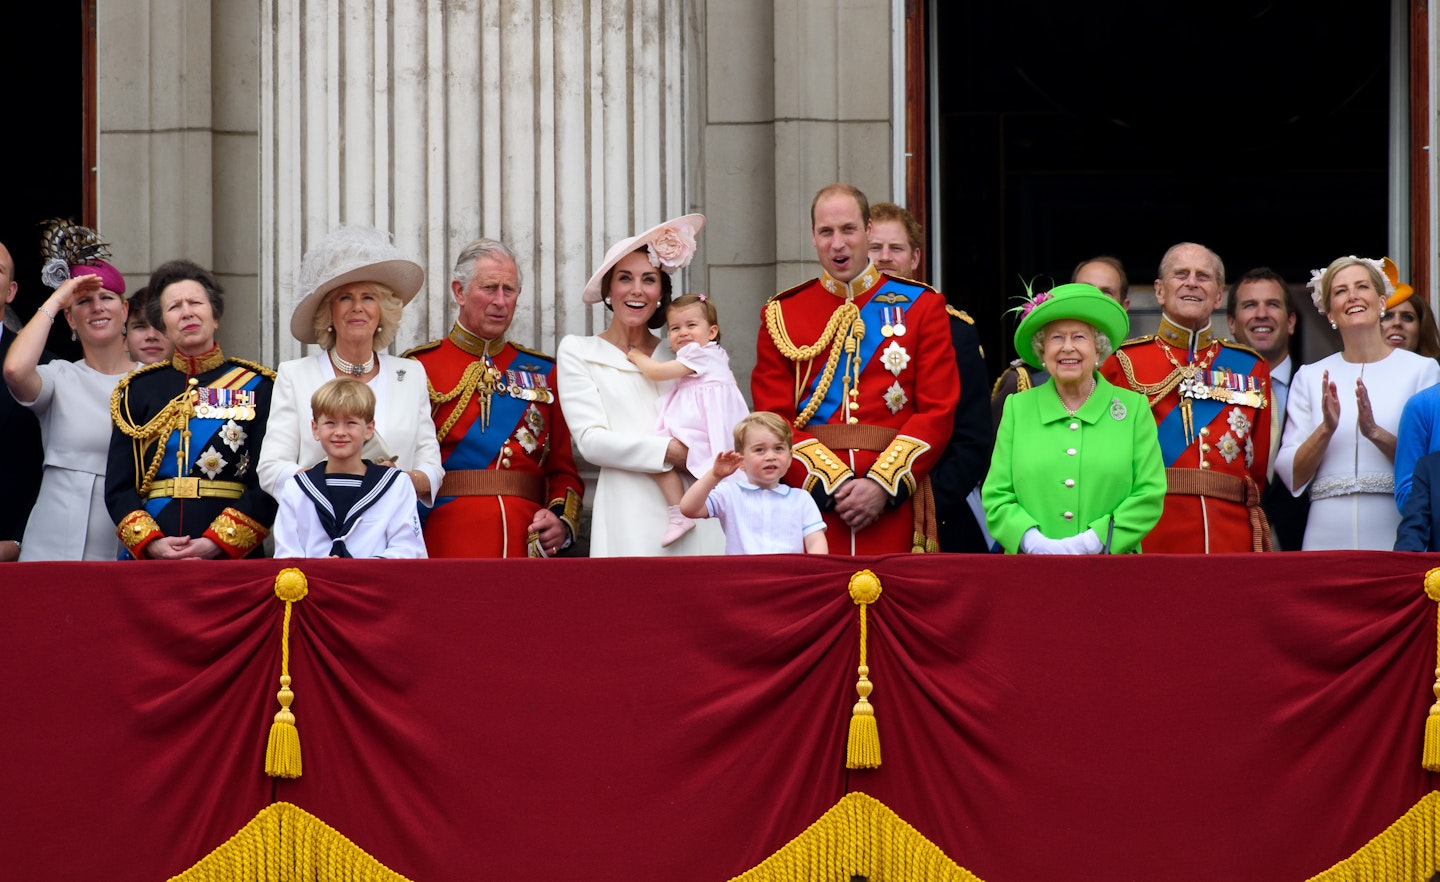 How Much Would The Royals Earn If They Weren't Royal And Had To Get Jobs?